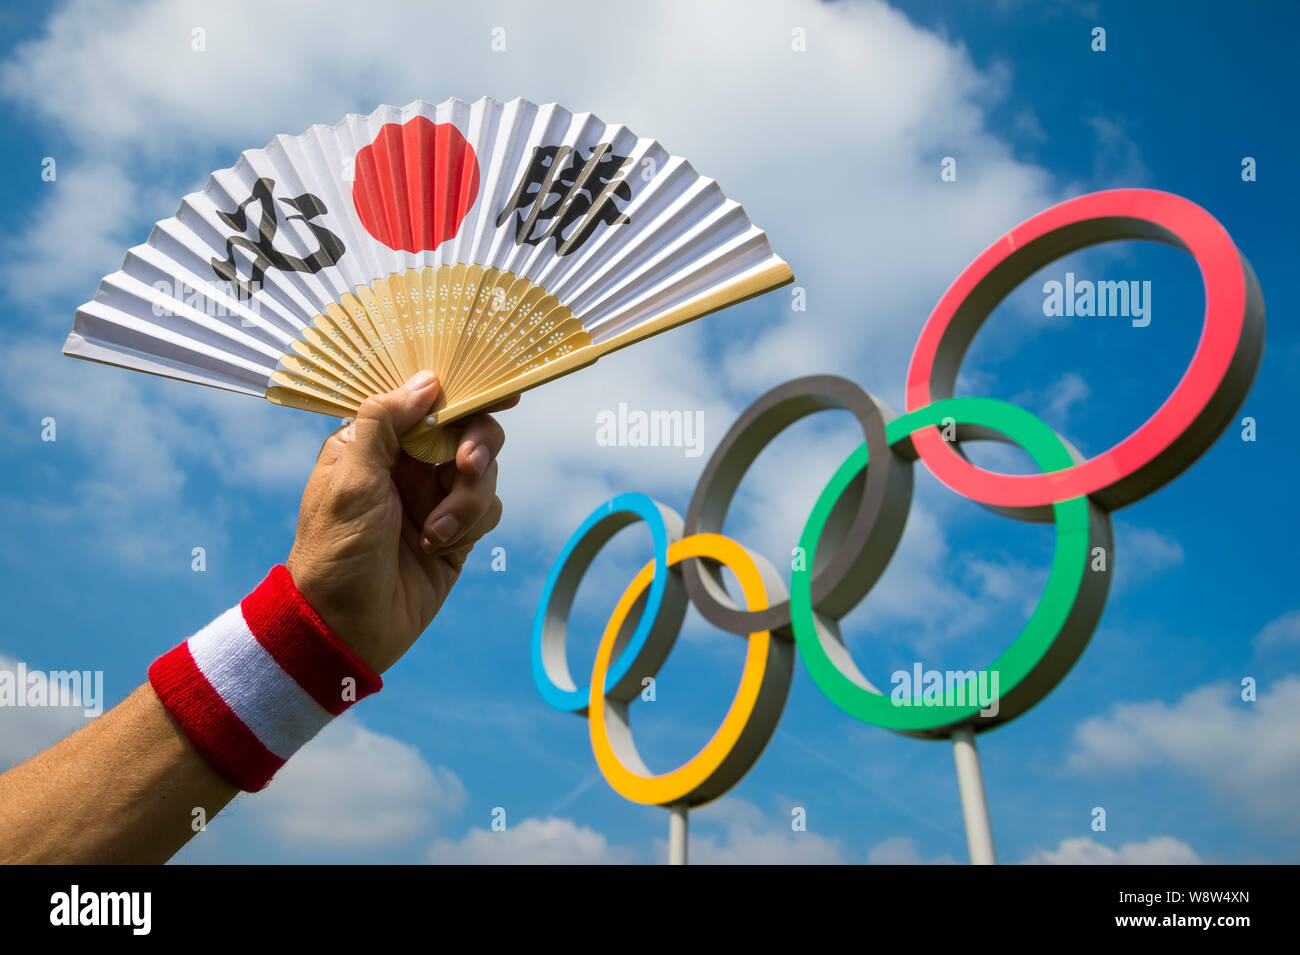 LONDON - APRIL 19, 2019: Hand holding a fan decorated with Japanese kanji characters spelling out hissho (certain victory) at a set of Olympic Rings. Stock Photo